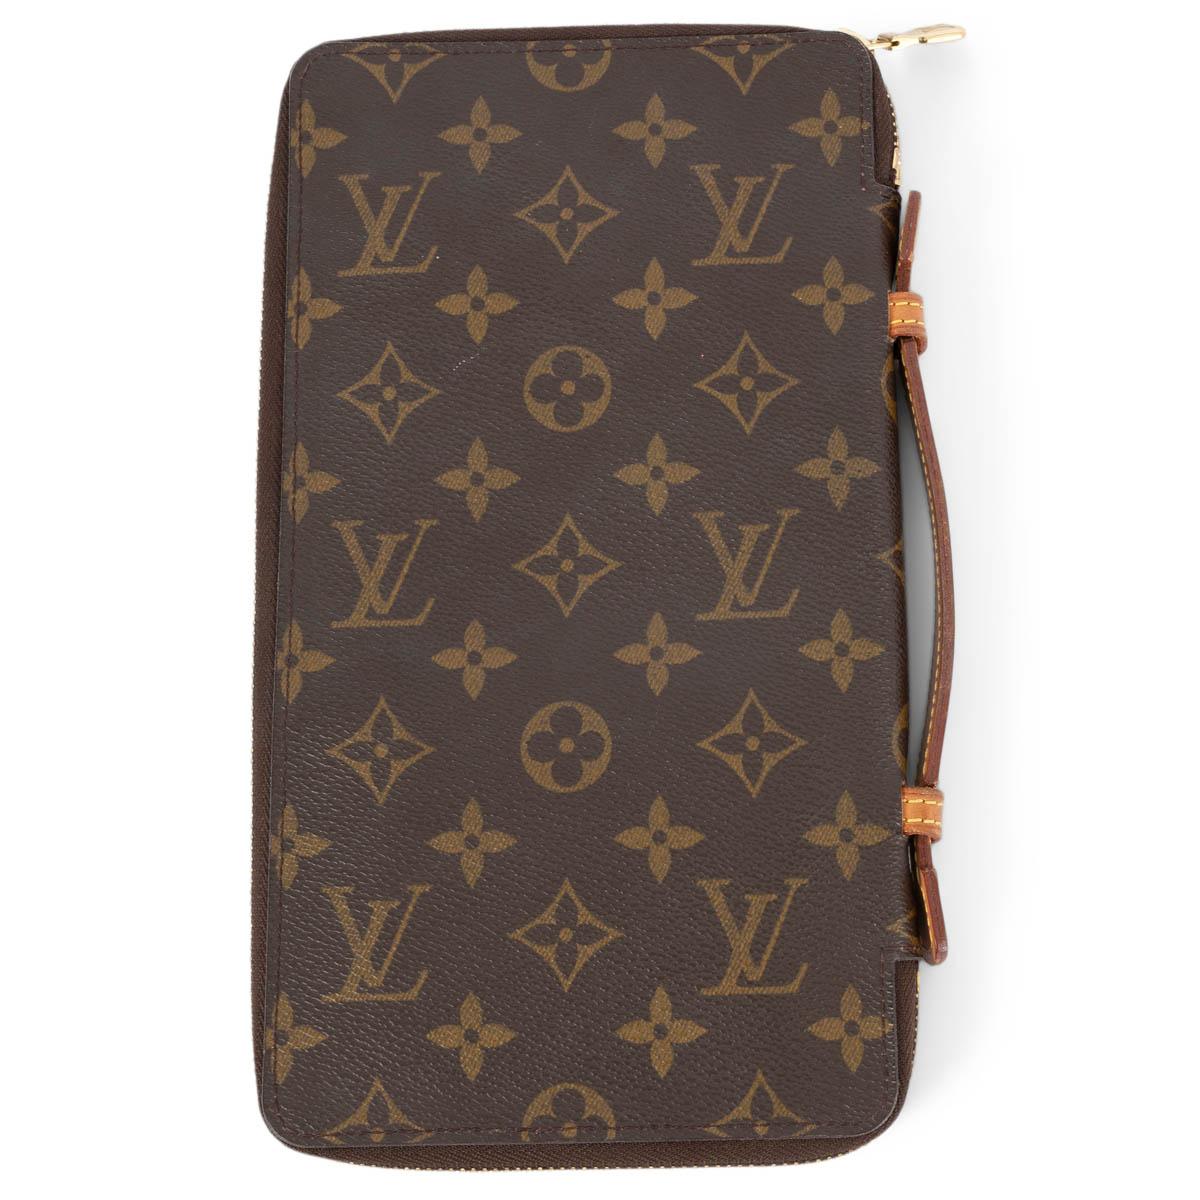 100% authentic Louis Vuitton Poche Escapade zip-around travel wallet in Ebene brown Monogram canvas. Features a natural leather handle. Lined in brown leather with boarding card holder and full-size open pocket on the left, a pen holder in the